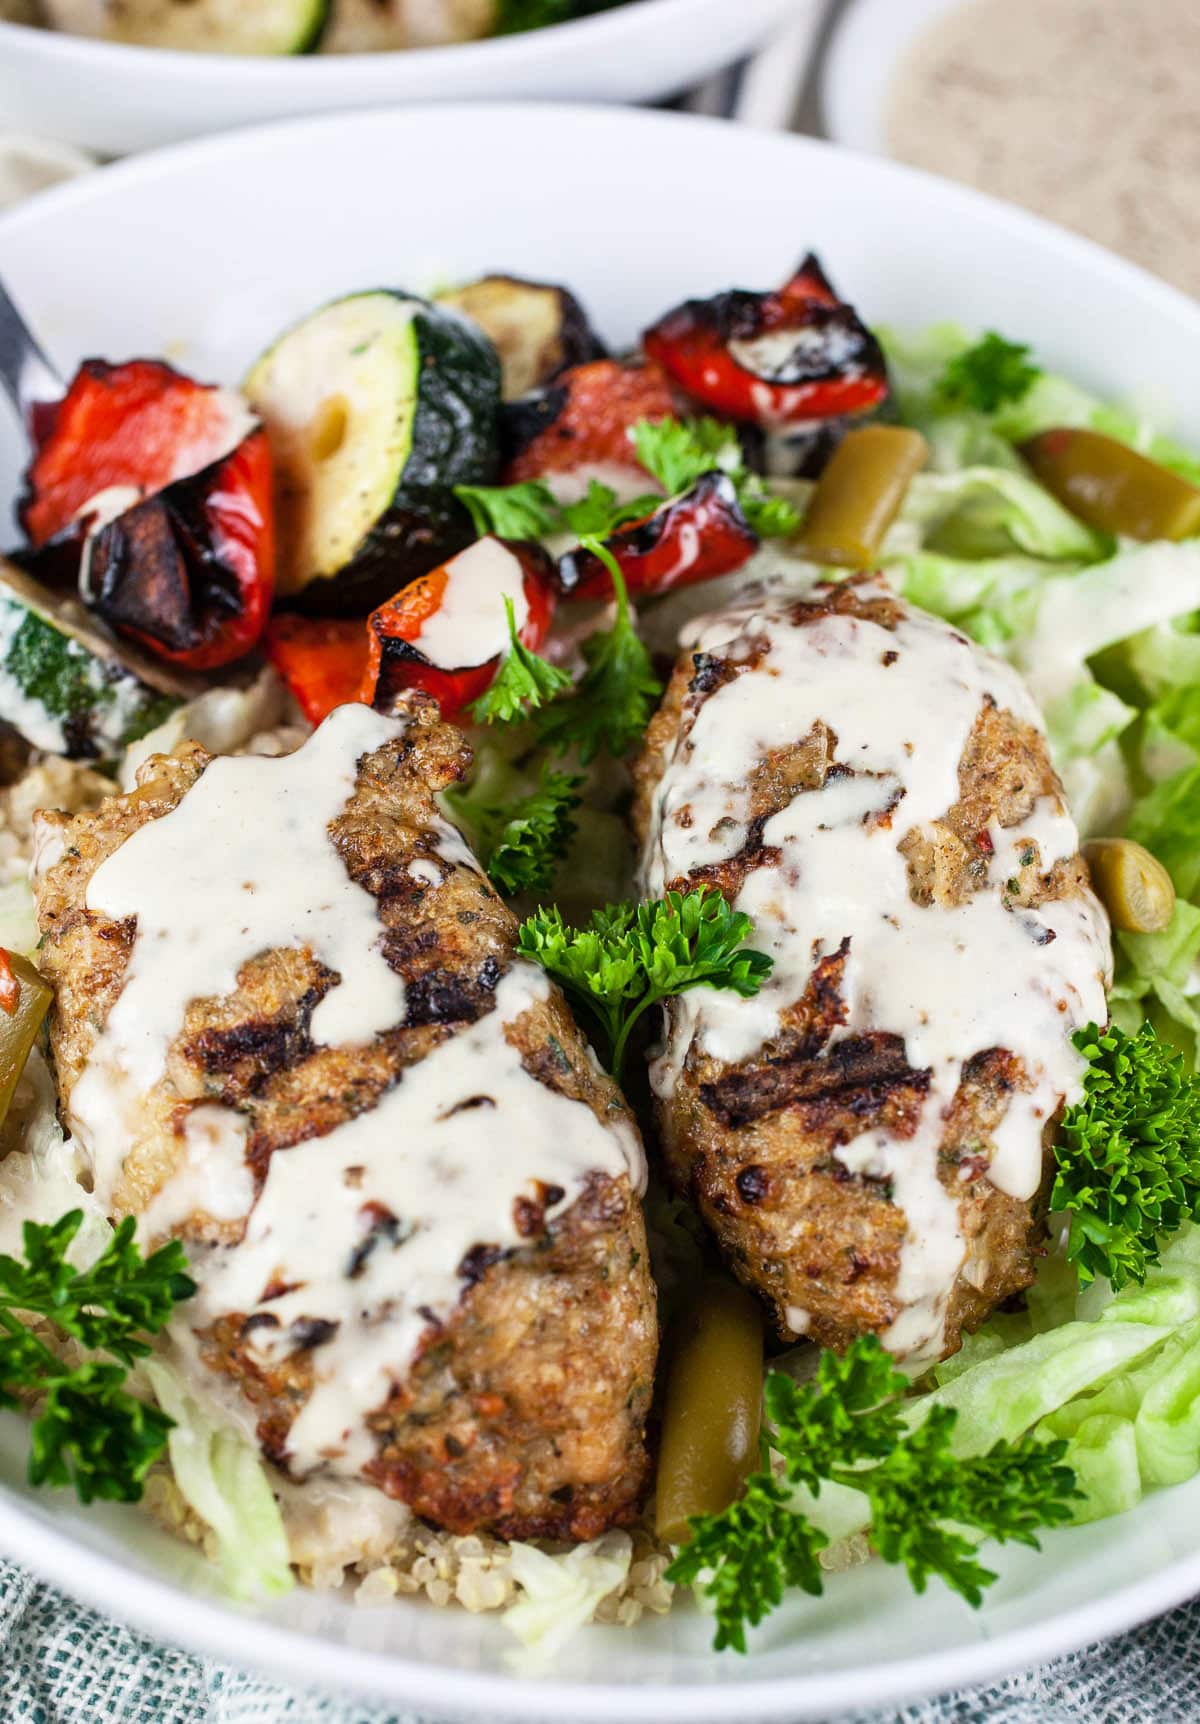 Chicken kofta kebabs with grilled vegetables and tahini sauce in white bowls.